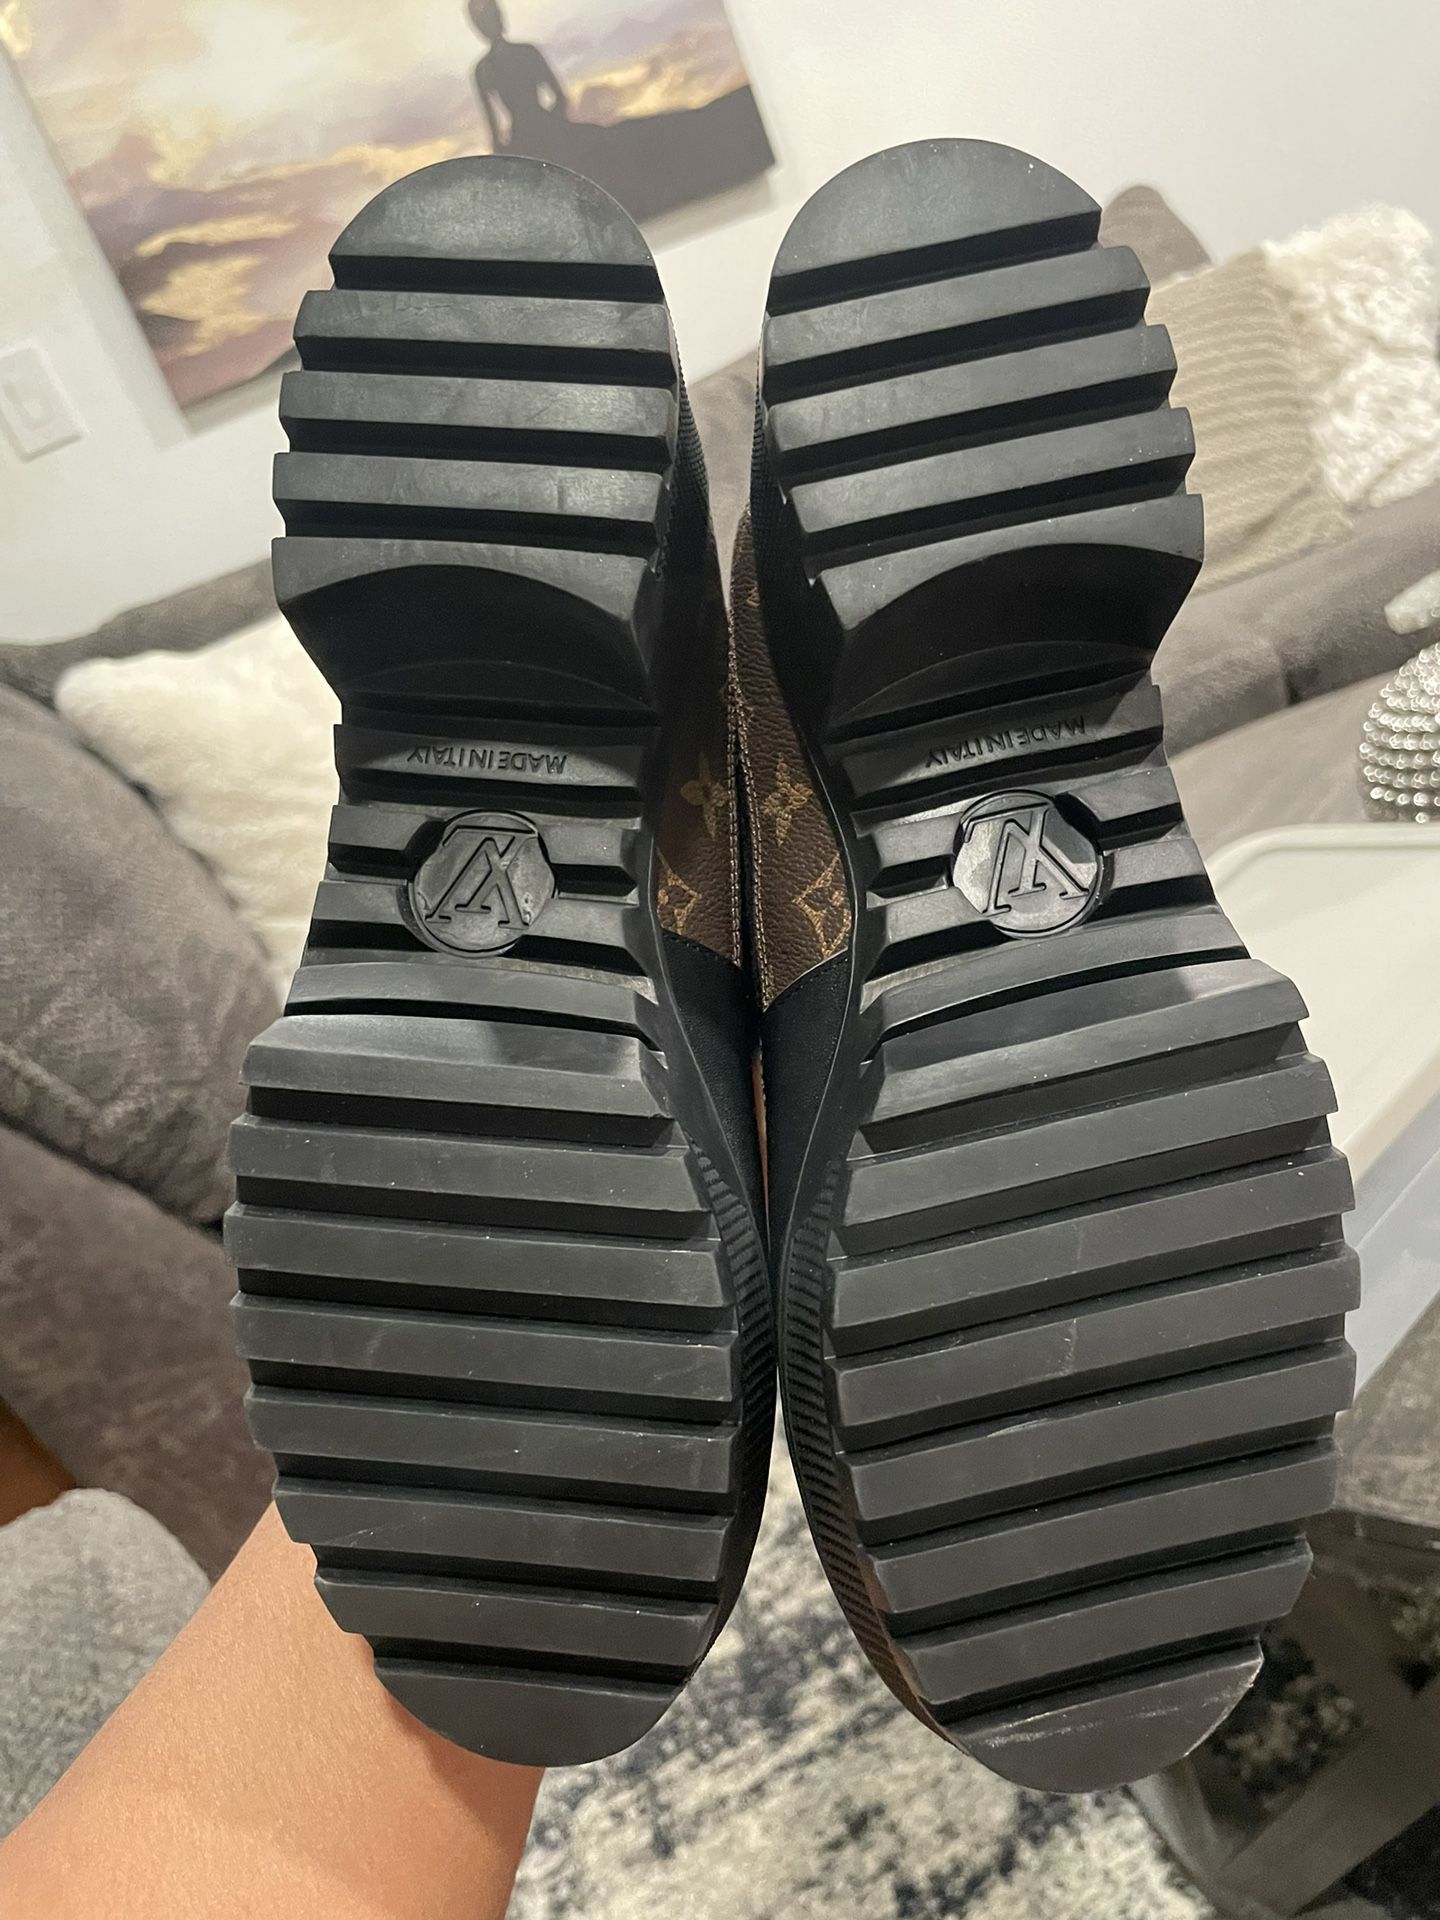 Louis Vuitton OBERKAMPF ANKLE Boots for Sale in Miami, FL - OfferUp